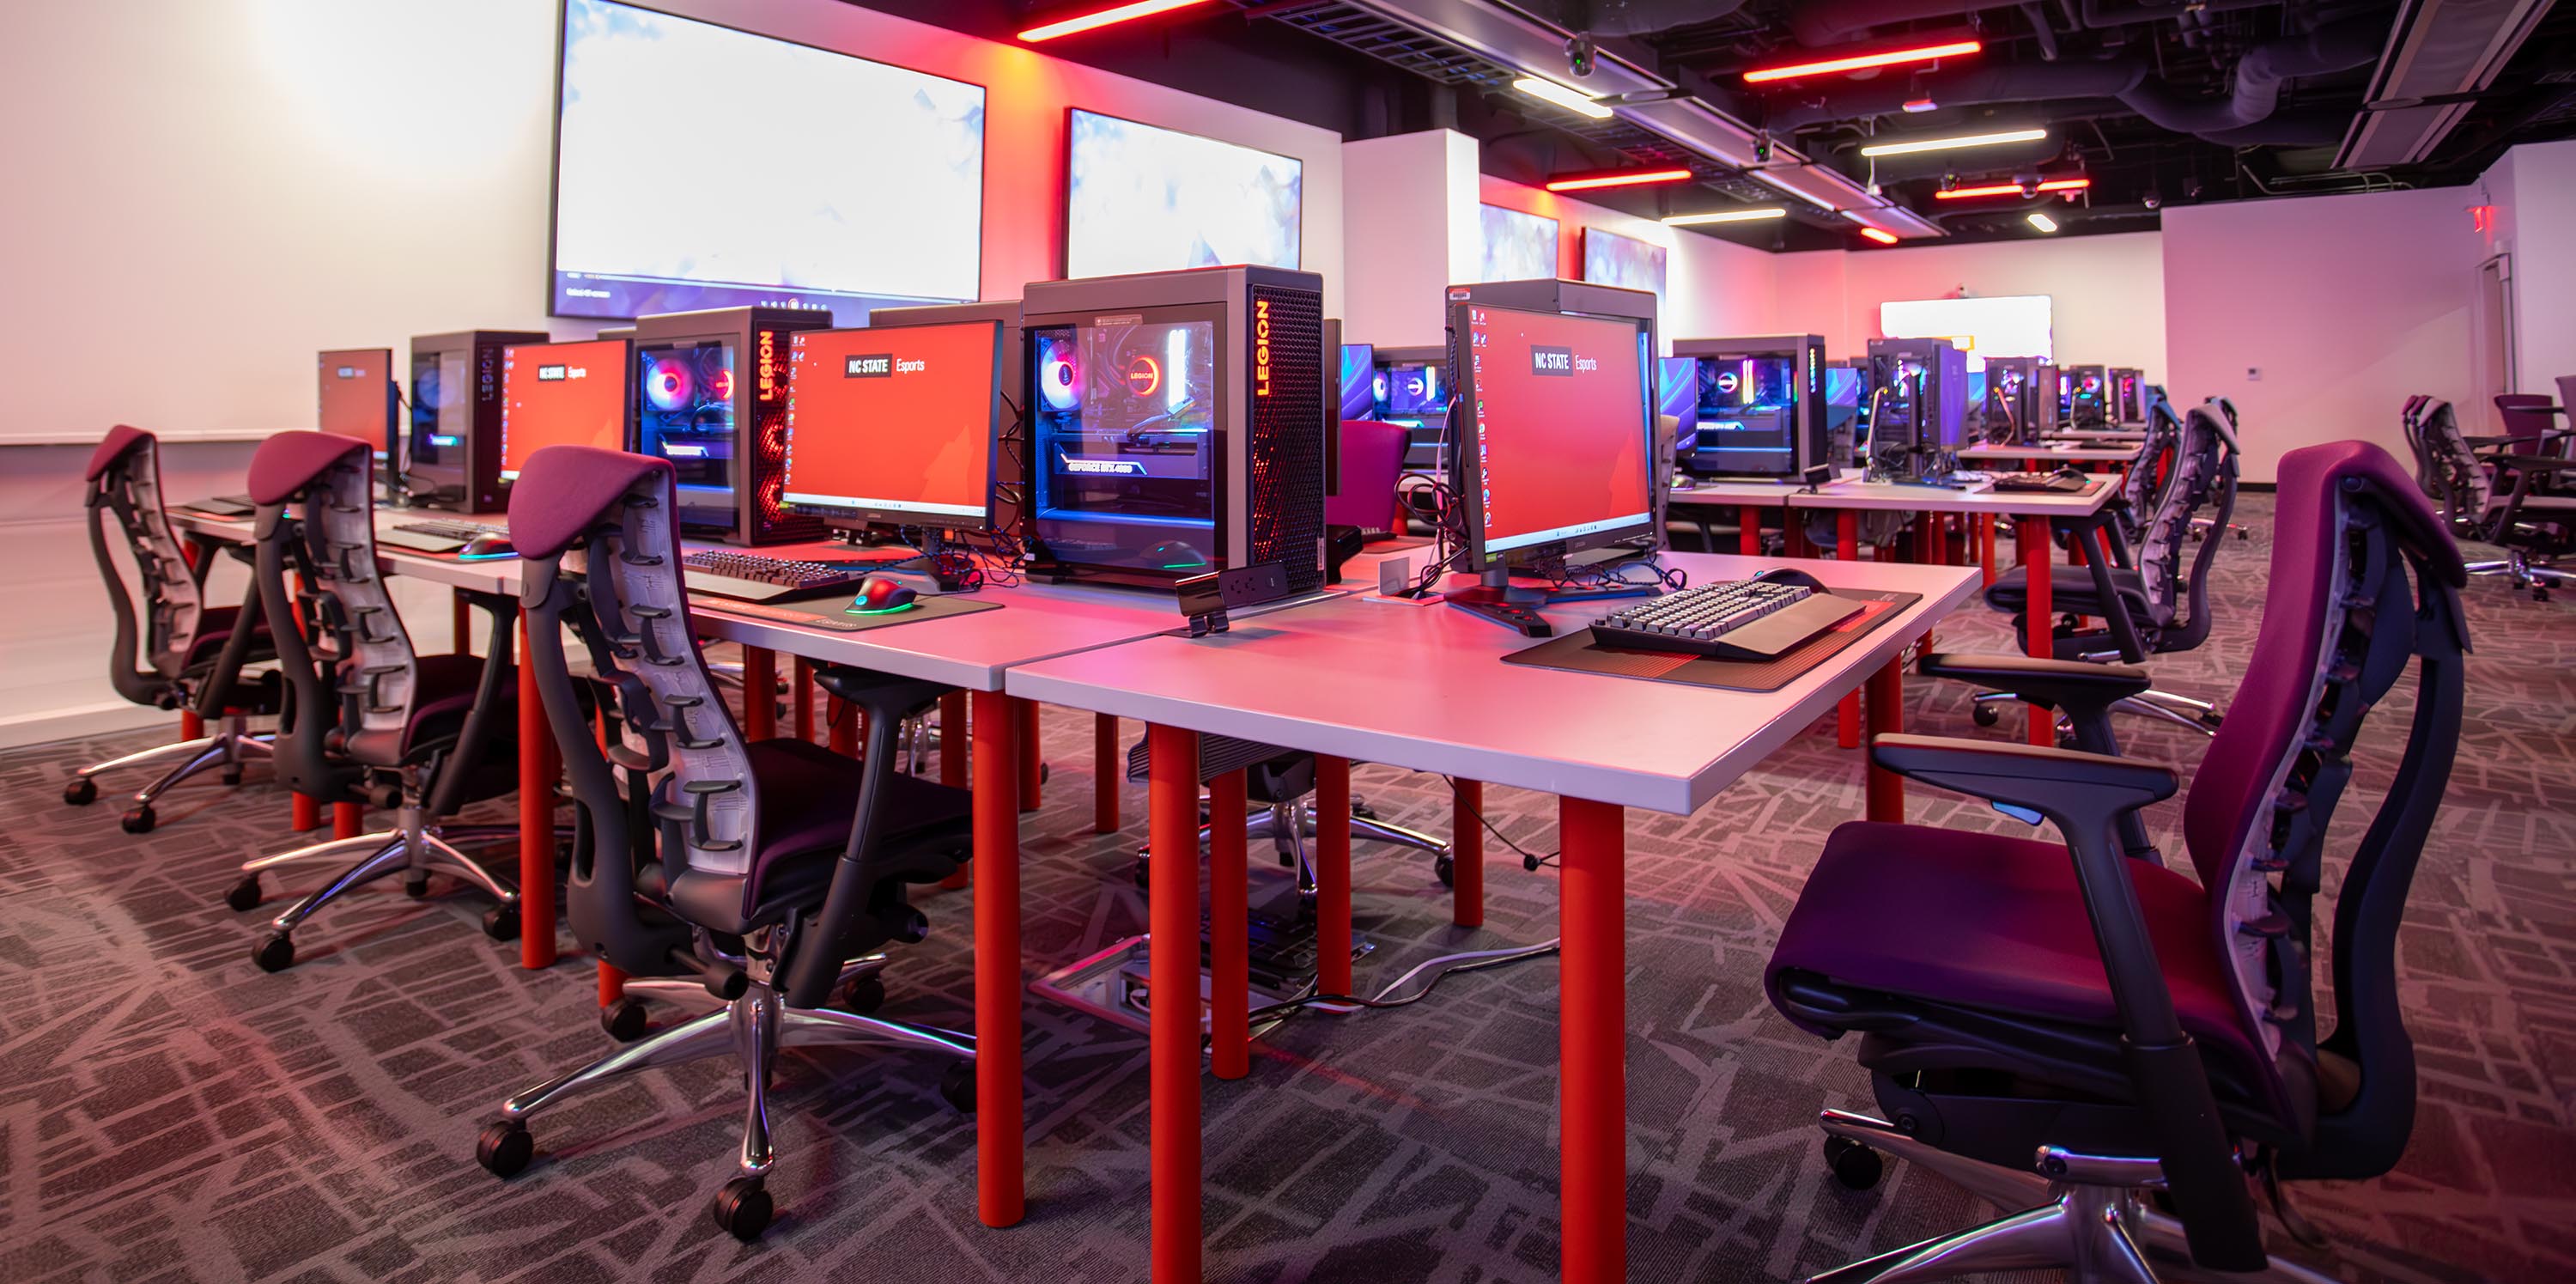 Large room with red lighting, gaming chairs, and tables topped with high-end PCs and monitors